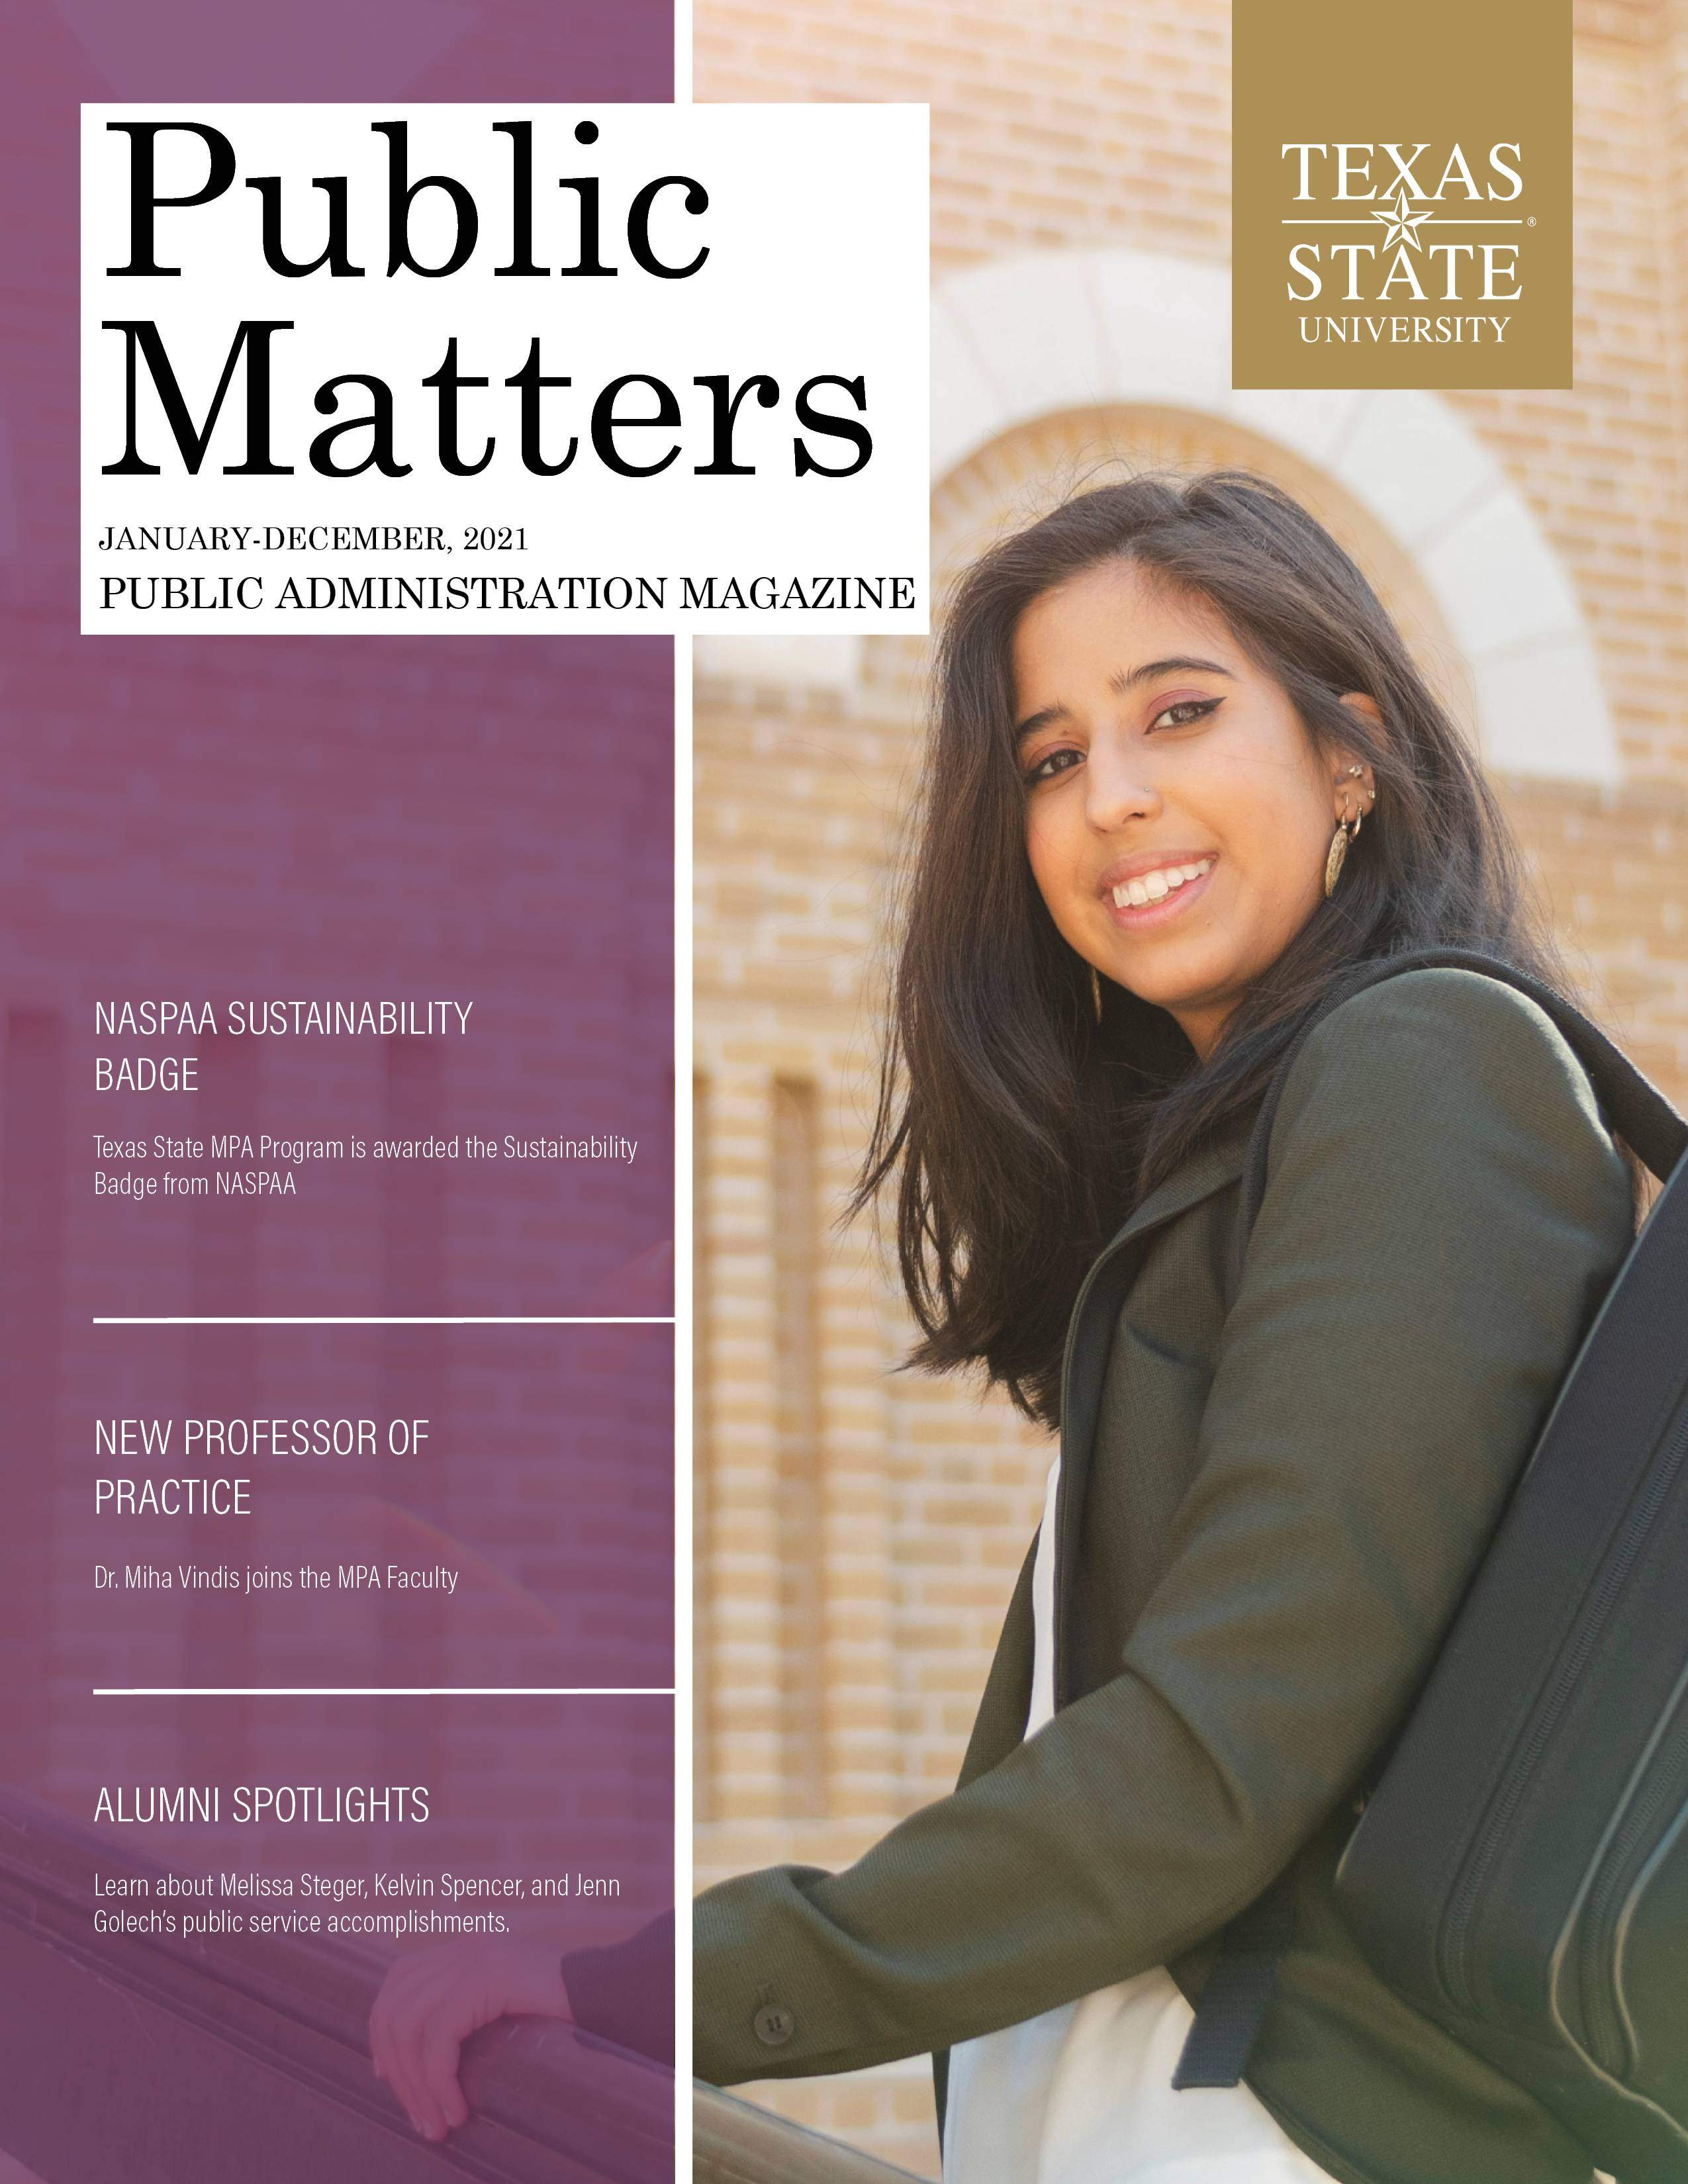 Click here to view the 2021 Public Matters magazine